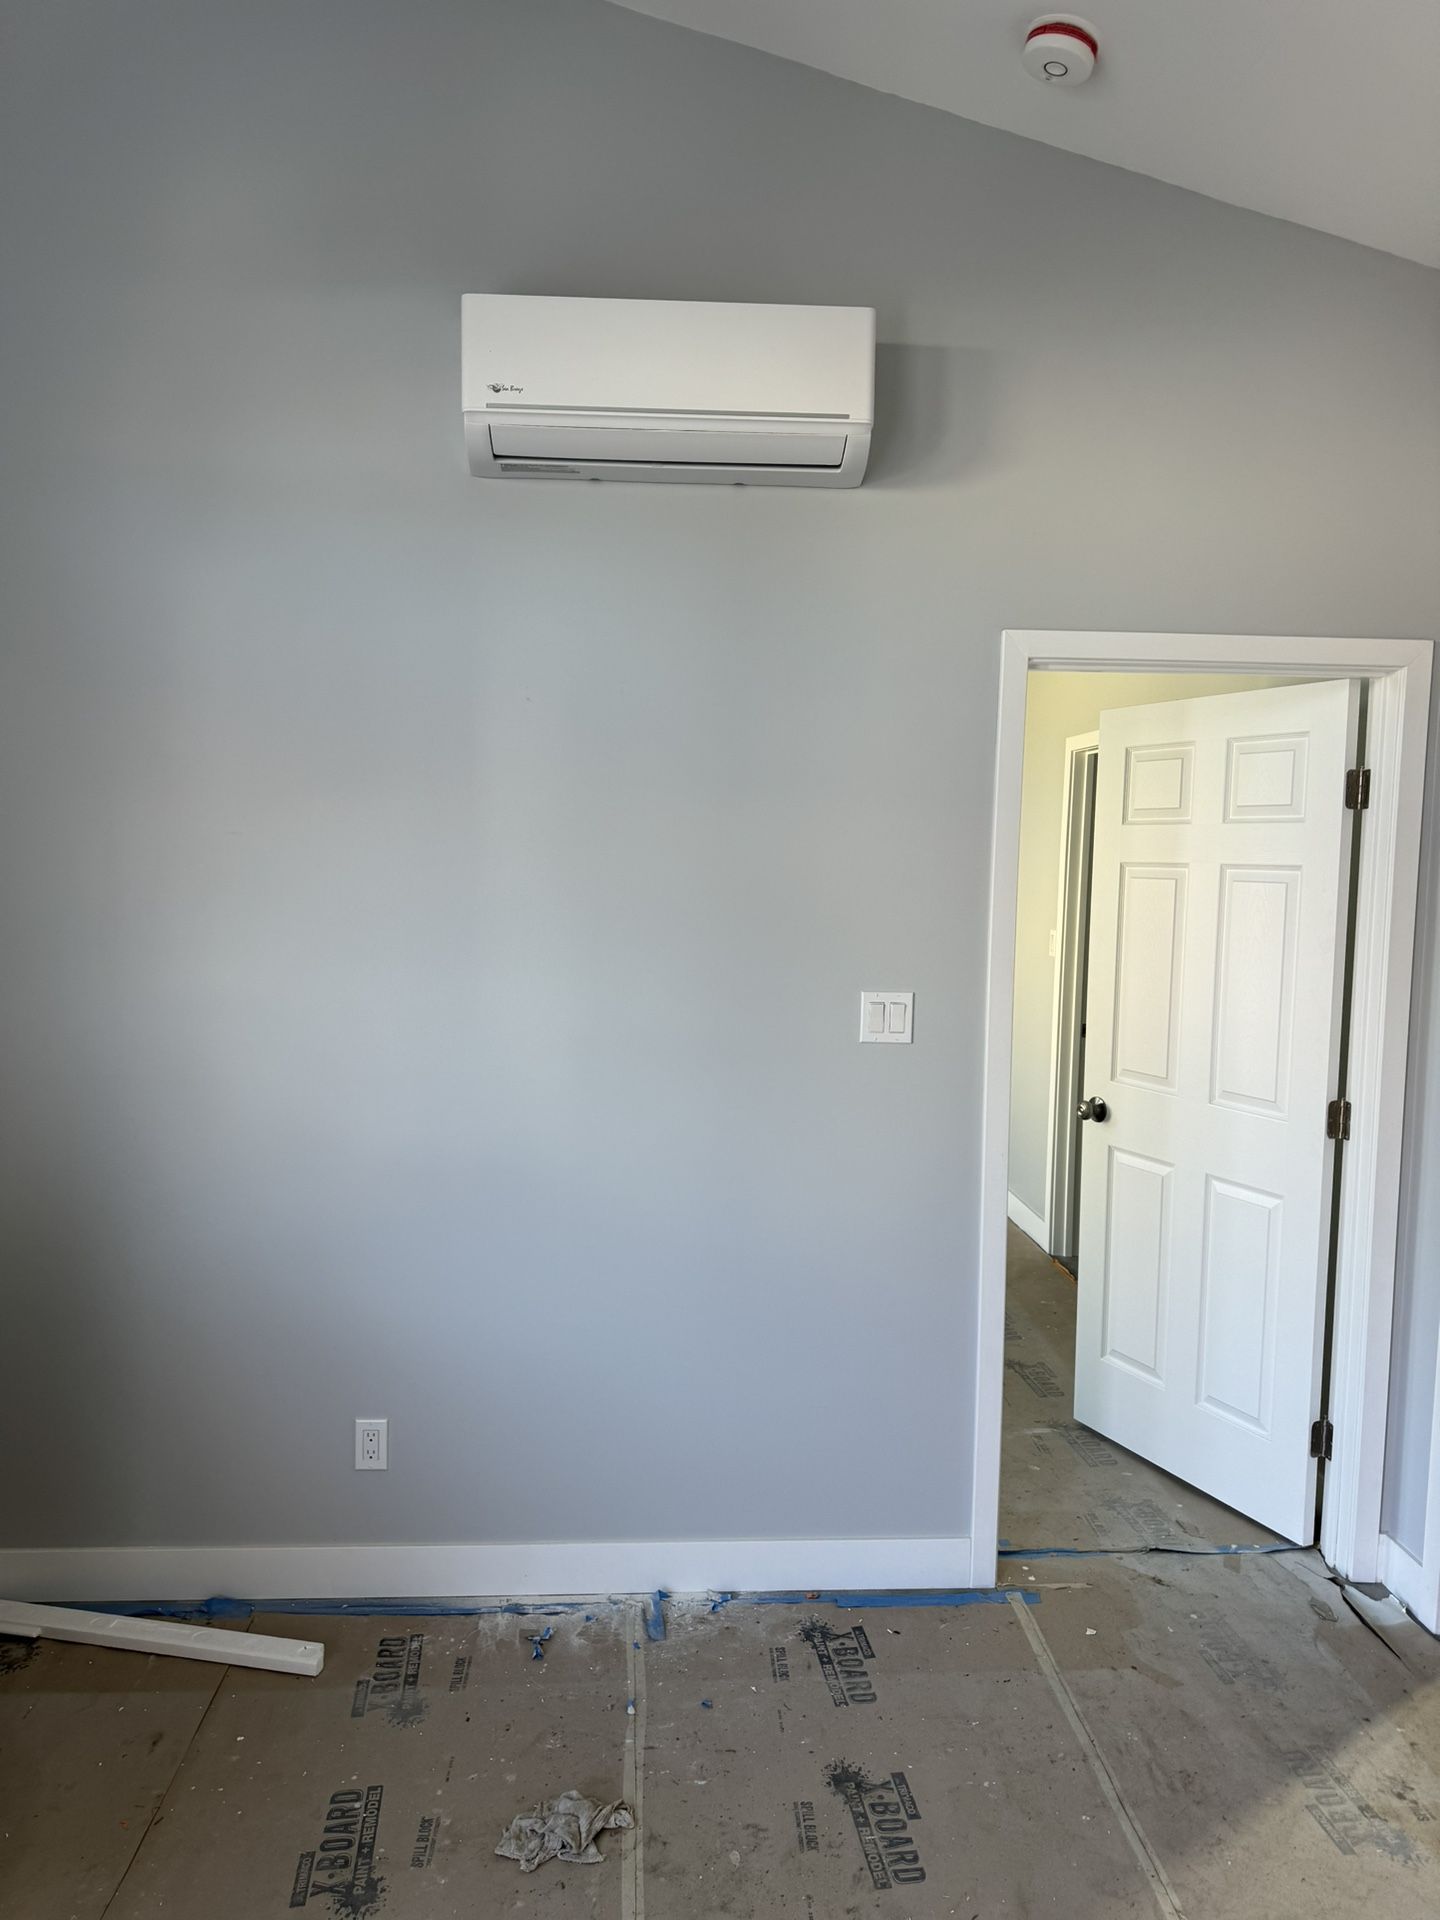 Mini Split Ductless Ac and Heater 